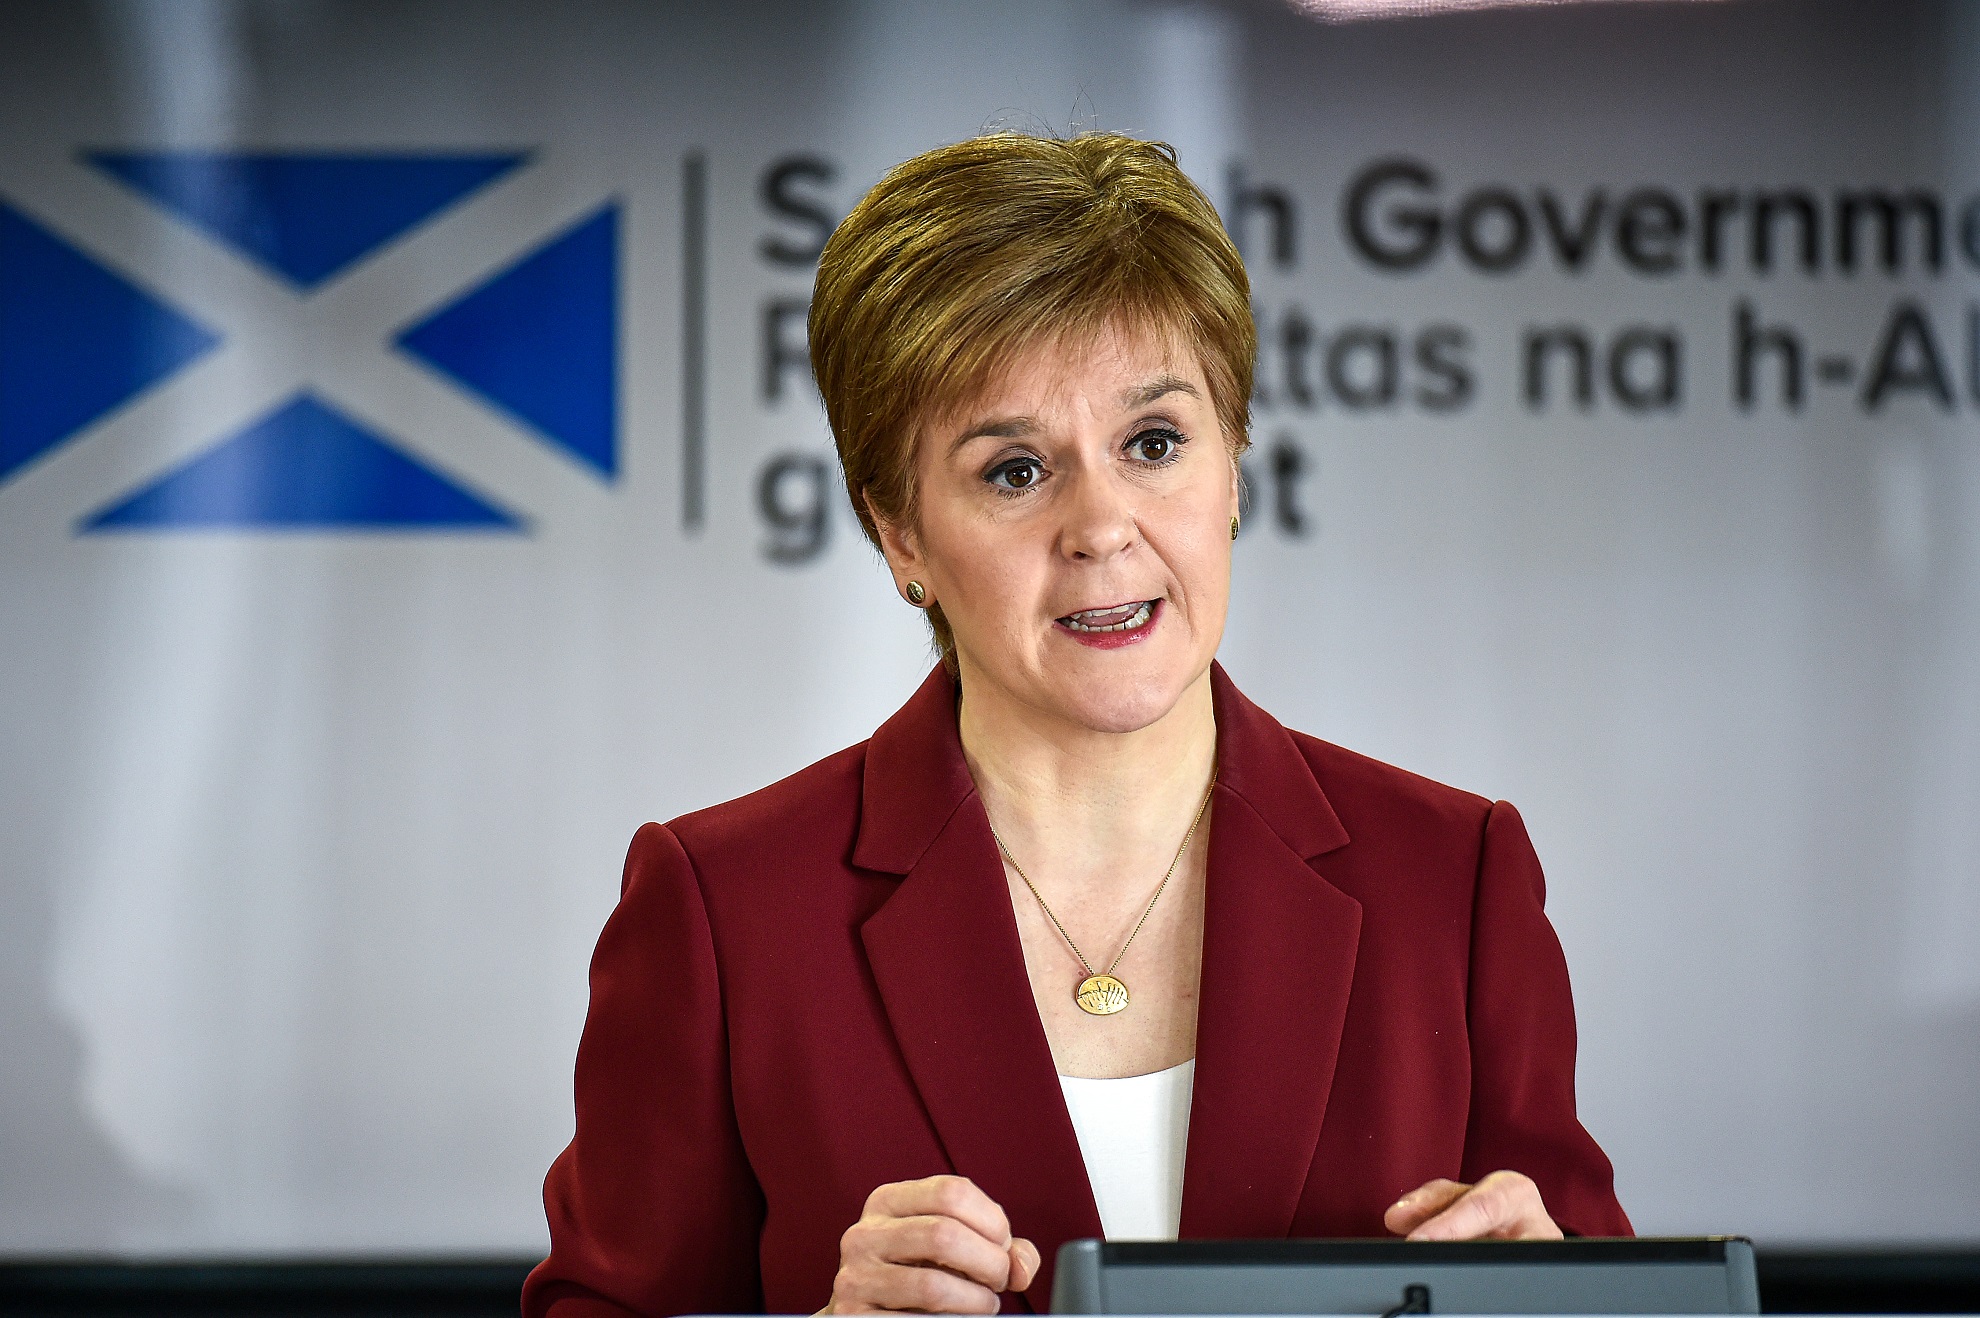 The First Minister says easing of lockdown measures unlikely.